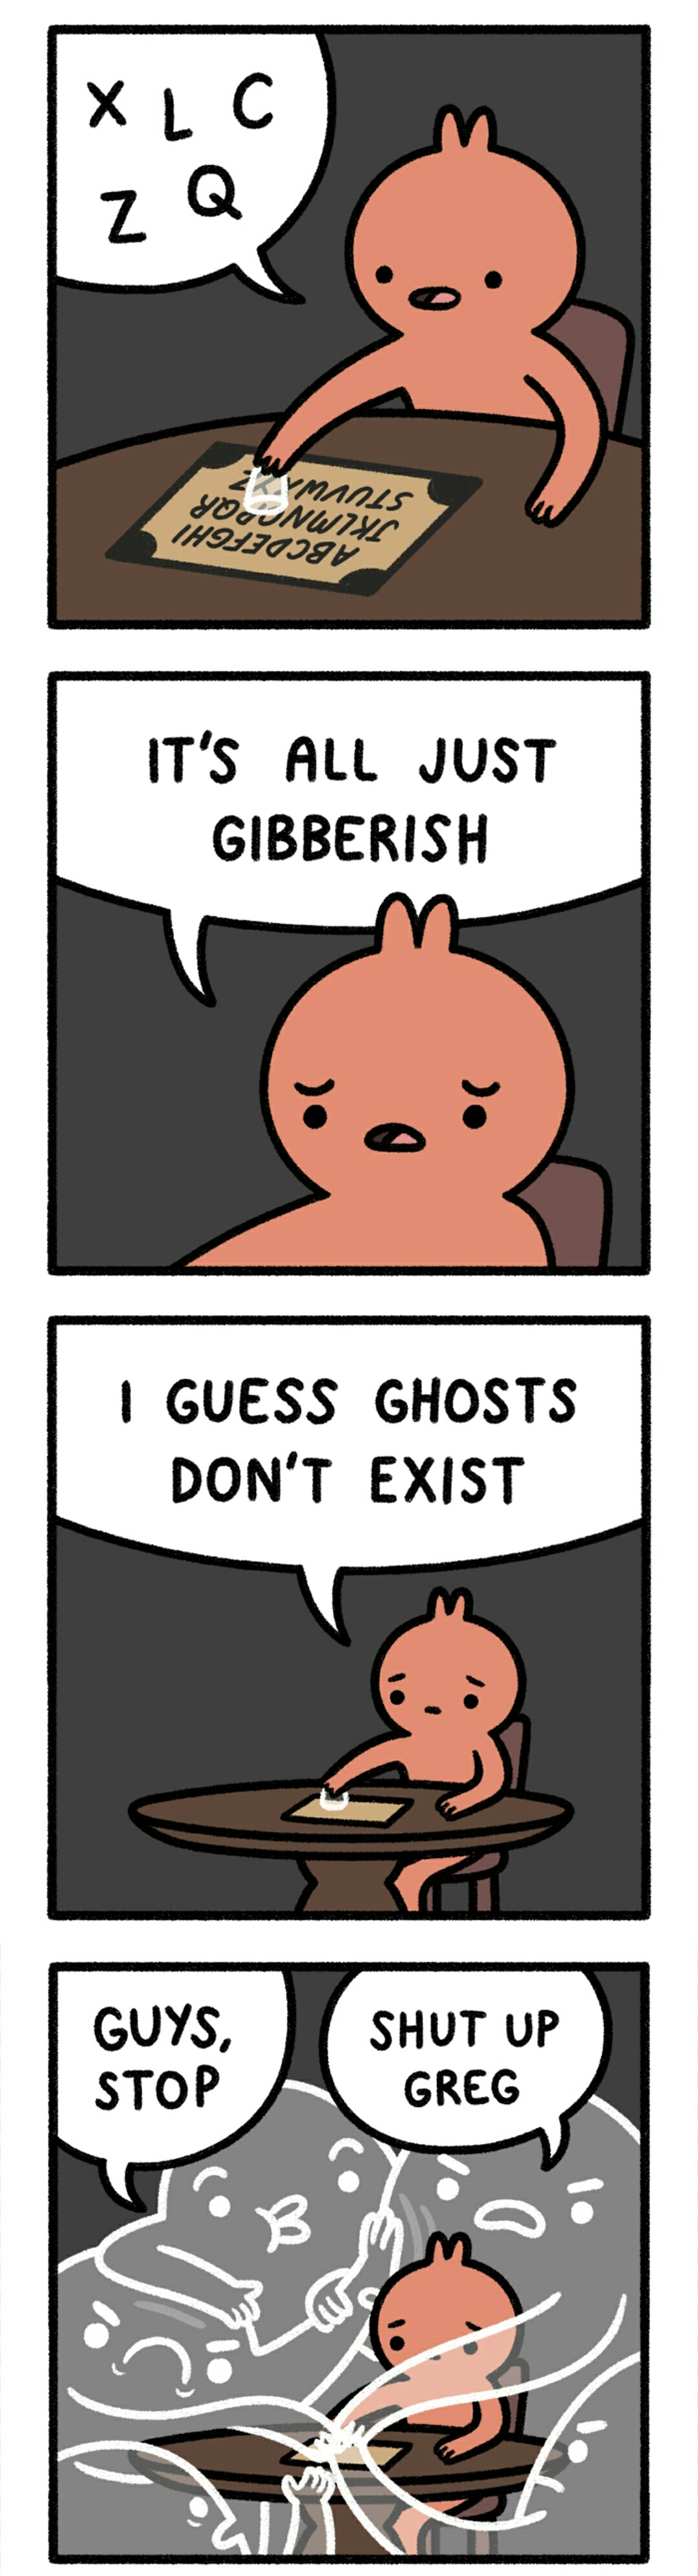 21 Spooky Memes, Comics And Funny Pics You Can Consider An Early Halloween Gift